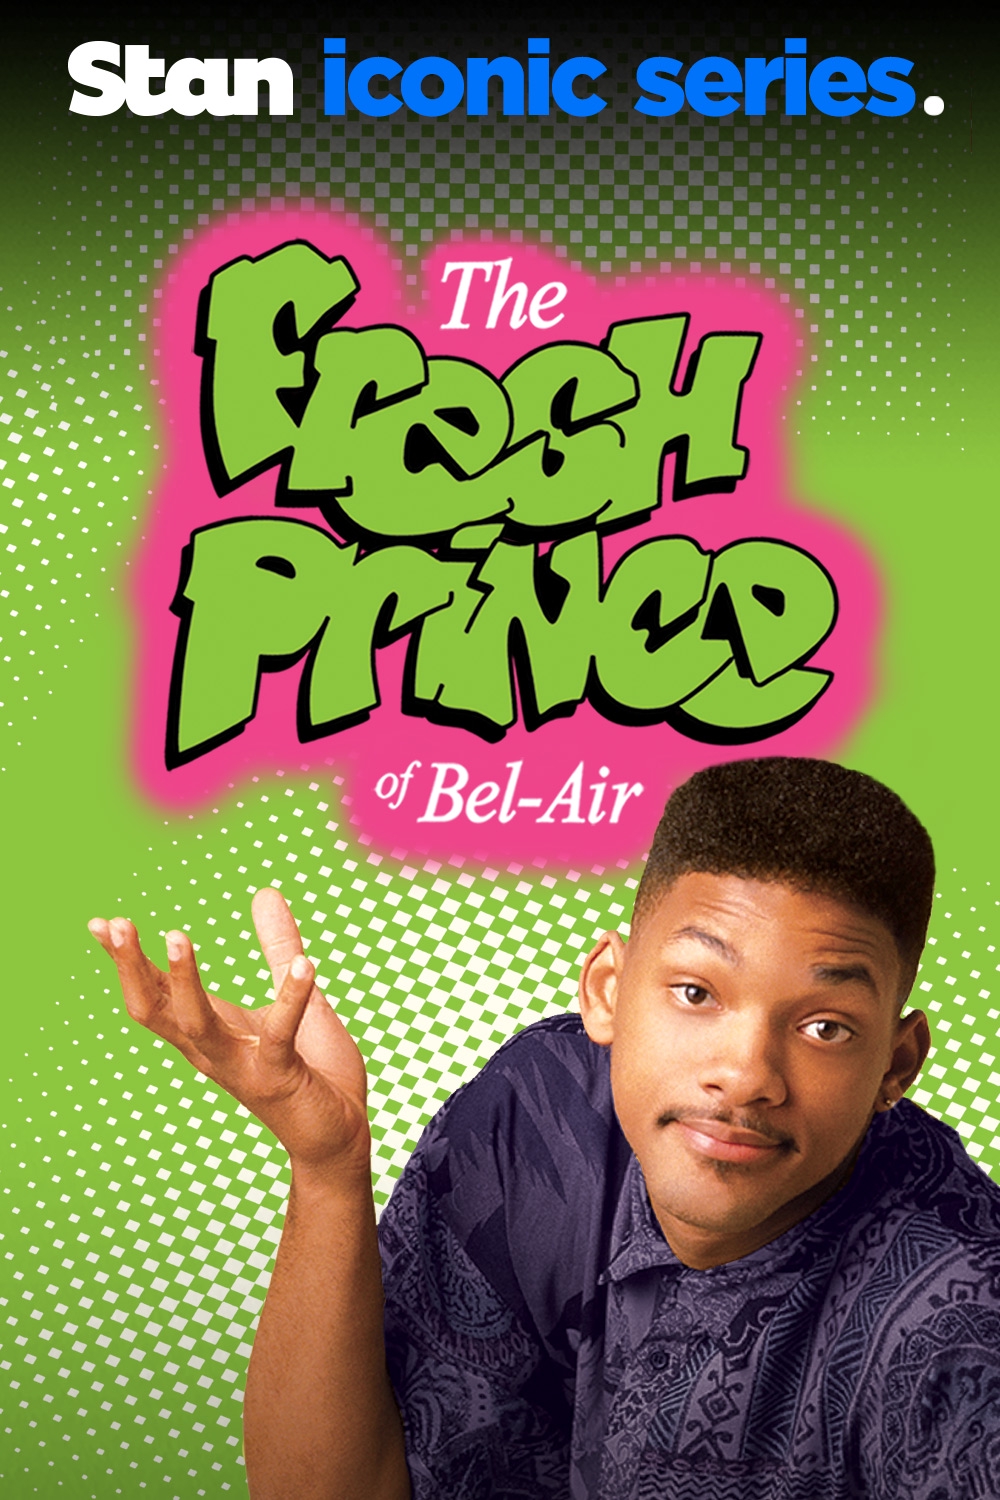 Watch The Fresh Prince of Bel-Air Online | Stream Seasons 1-6 Now | Stan - What Can I Watch Fresh Prince Of Bel Air On